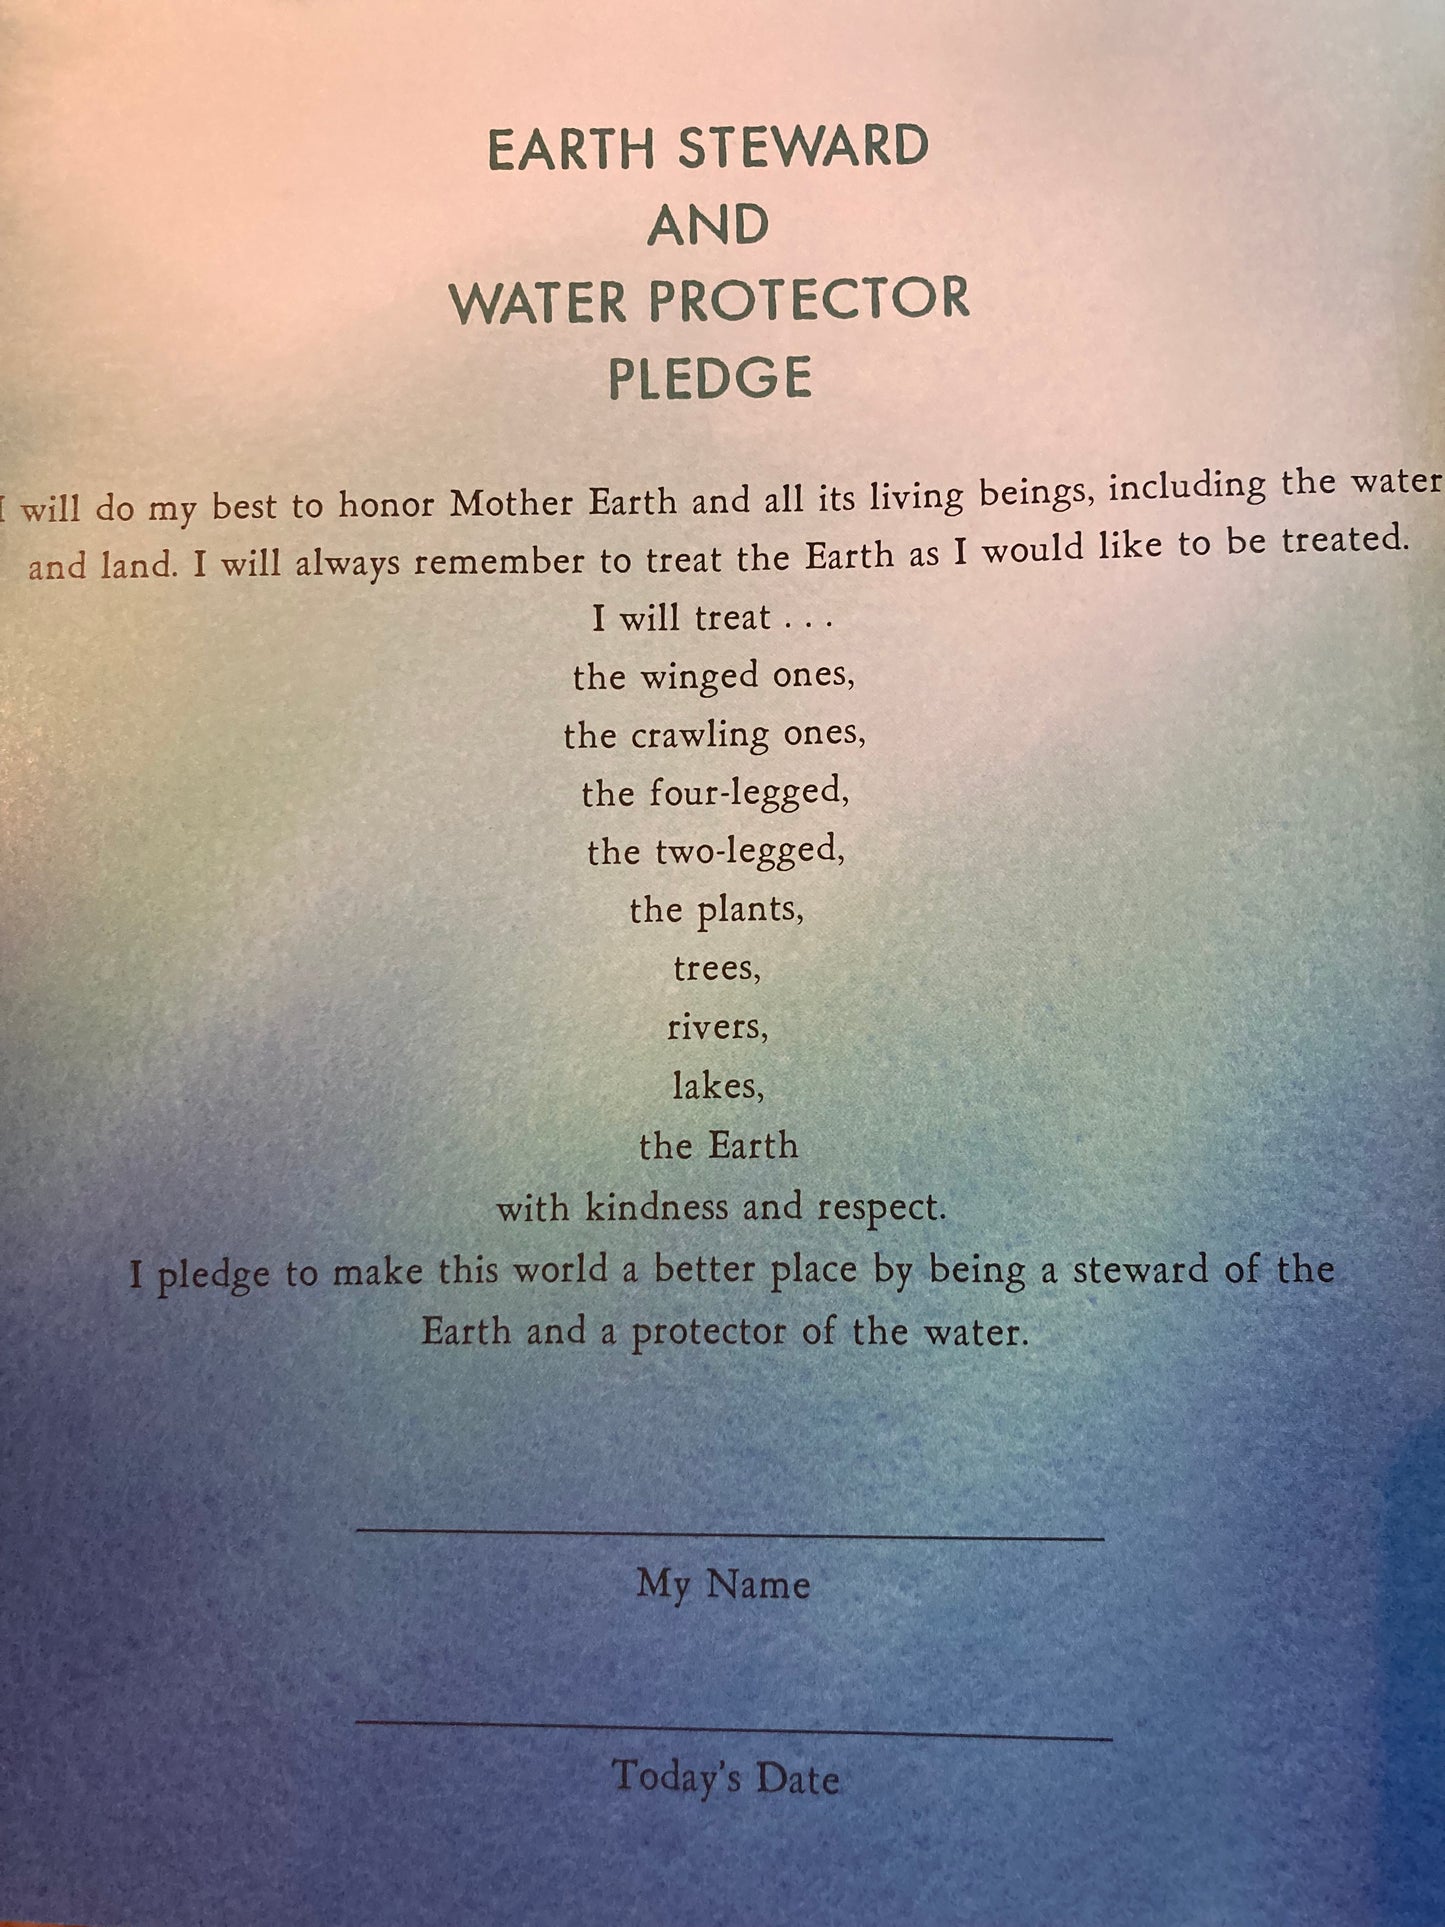 Children’s Picture Book - WE ARE WATER PROTECTORS